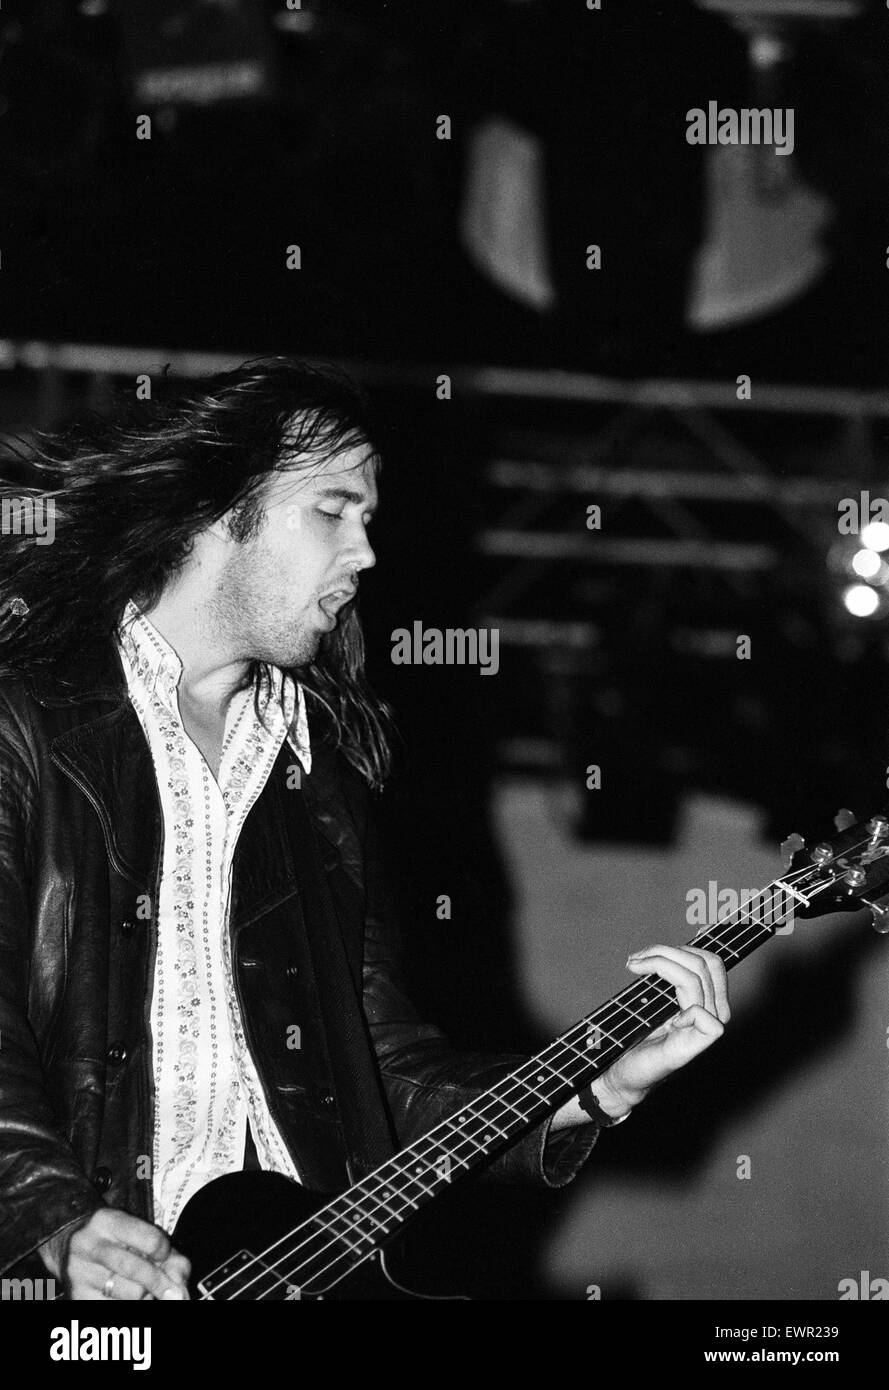 Krist Novoselic, bass guitarist of Seattle-based grunge rock group Nirvana,  on stage during the group's headlining performance at the Reading Festival. 30th August 1992. Stock Photo